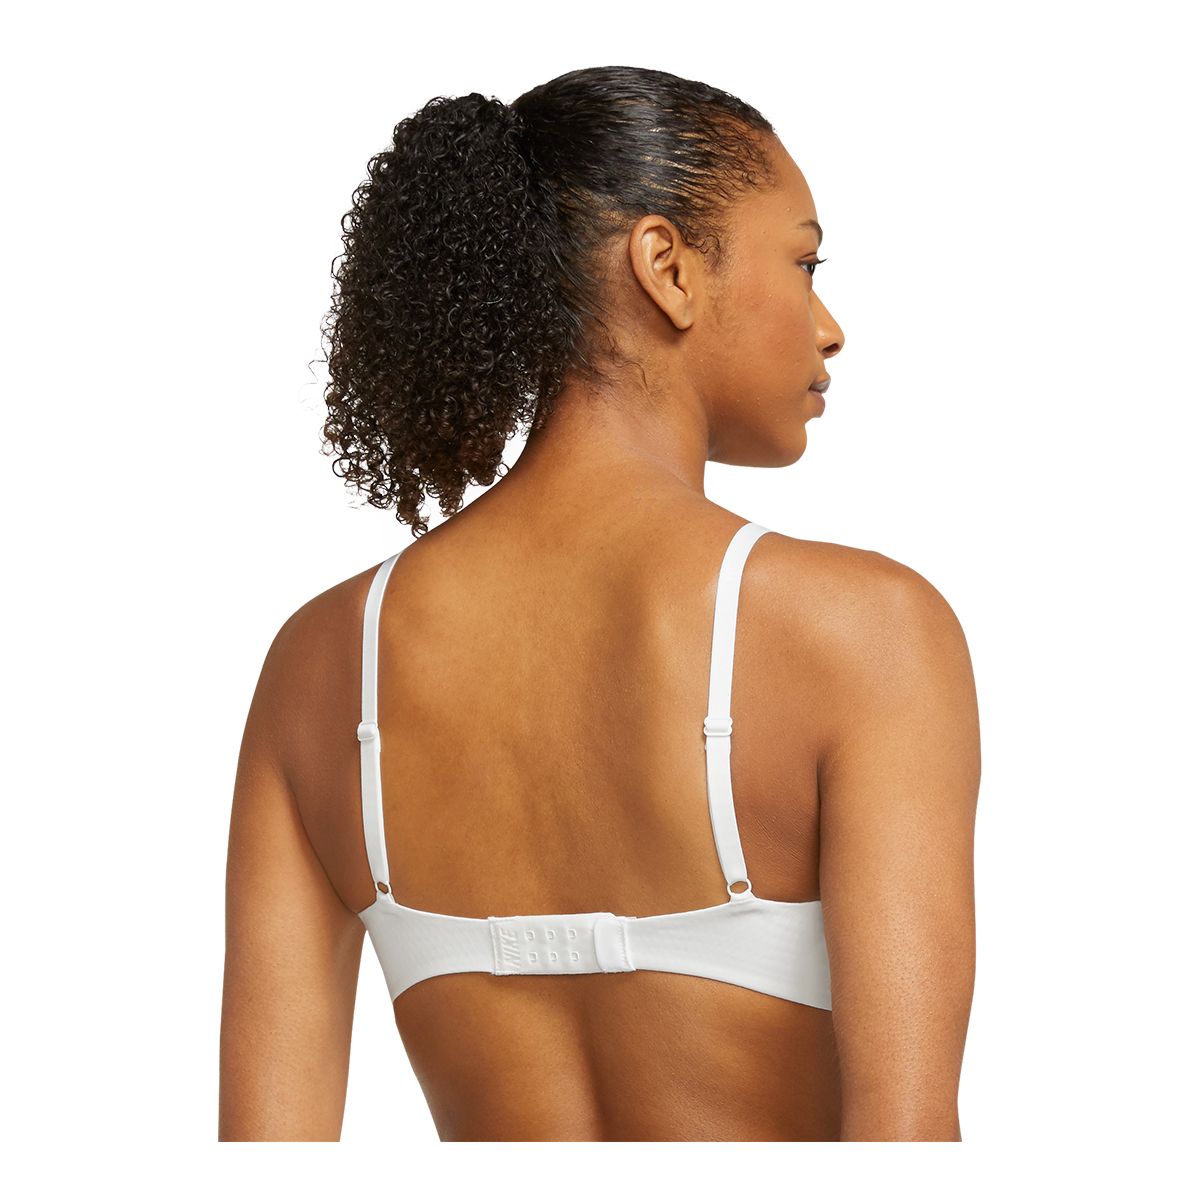 Nike Alate Minimalist Light-Support Padded Sports Bra Desert Dust Size L  (F-G) Tan Size L - $45 New With Tags - From Simply